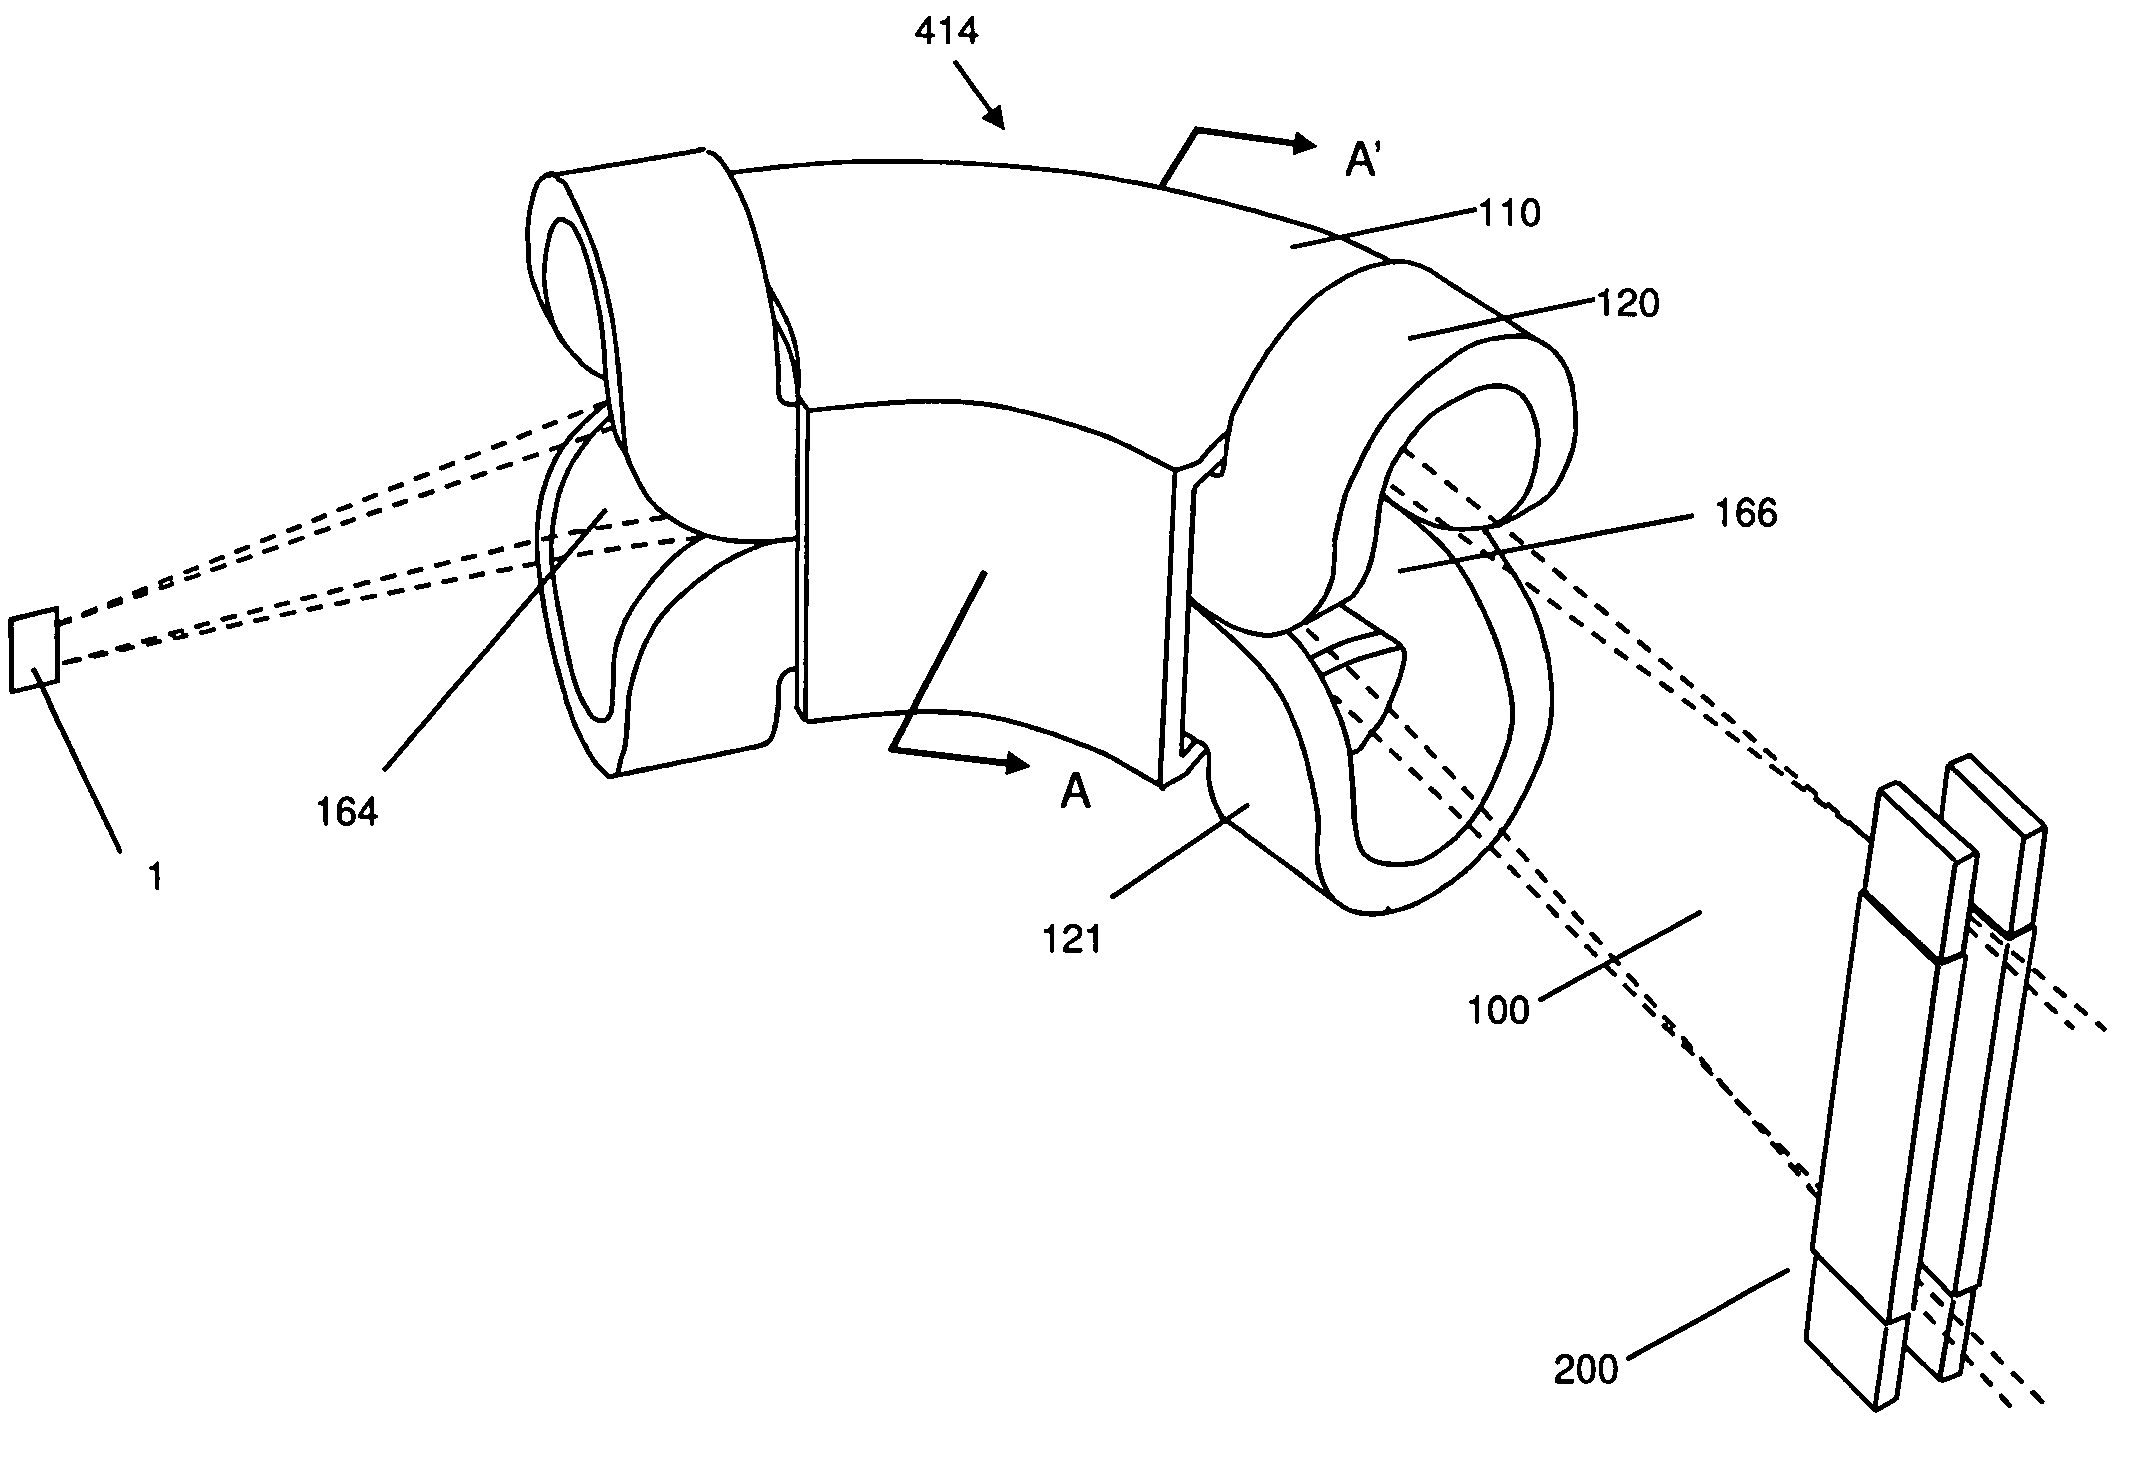 Apparatus and methods for ion beam implantation using ribbon and spot beams